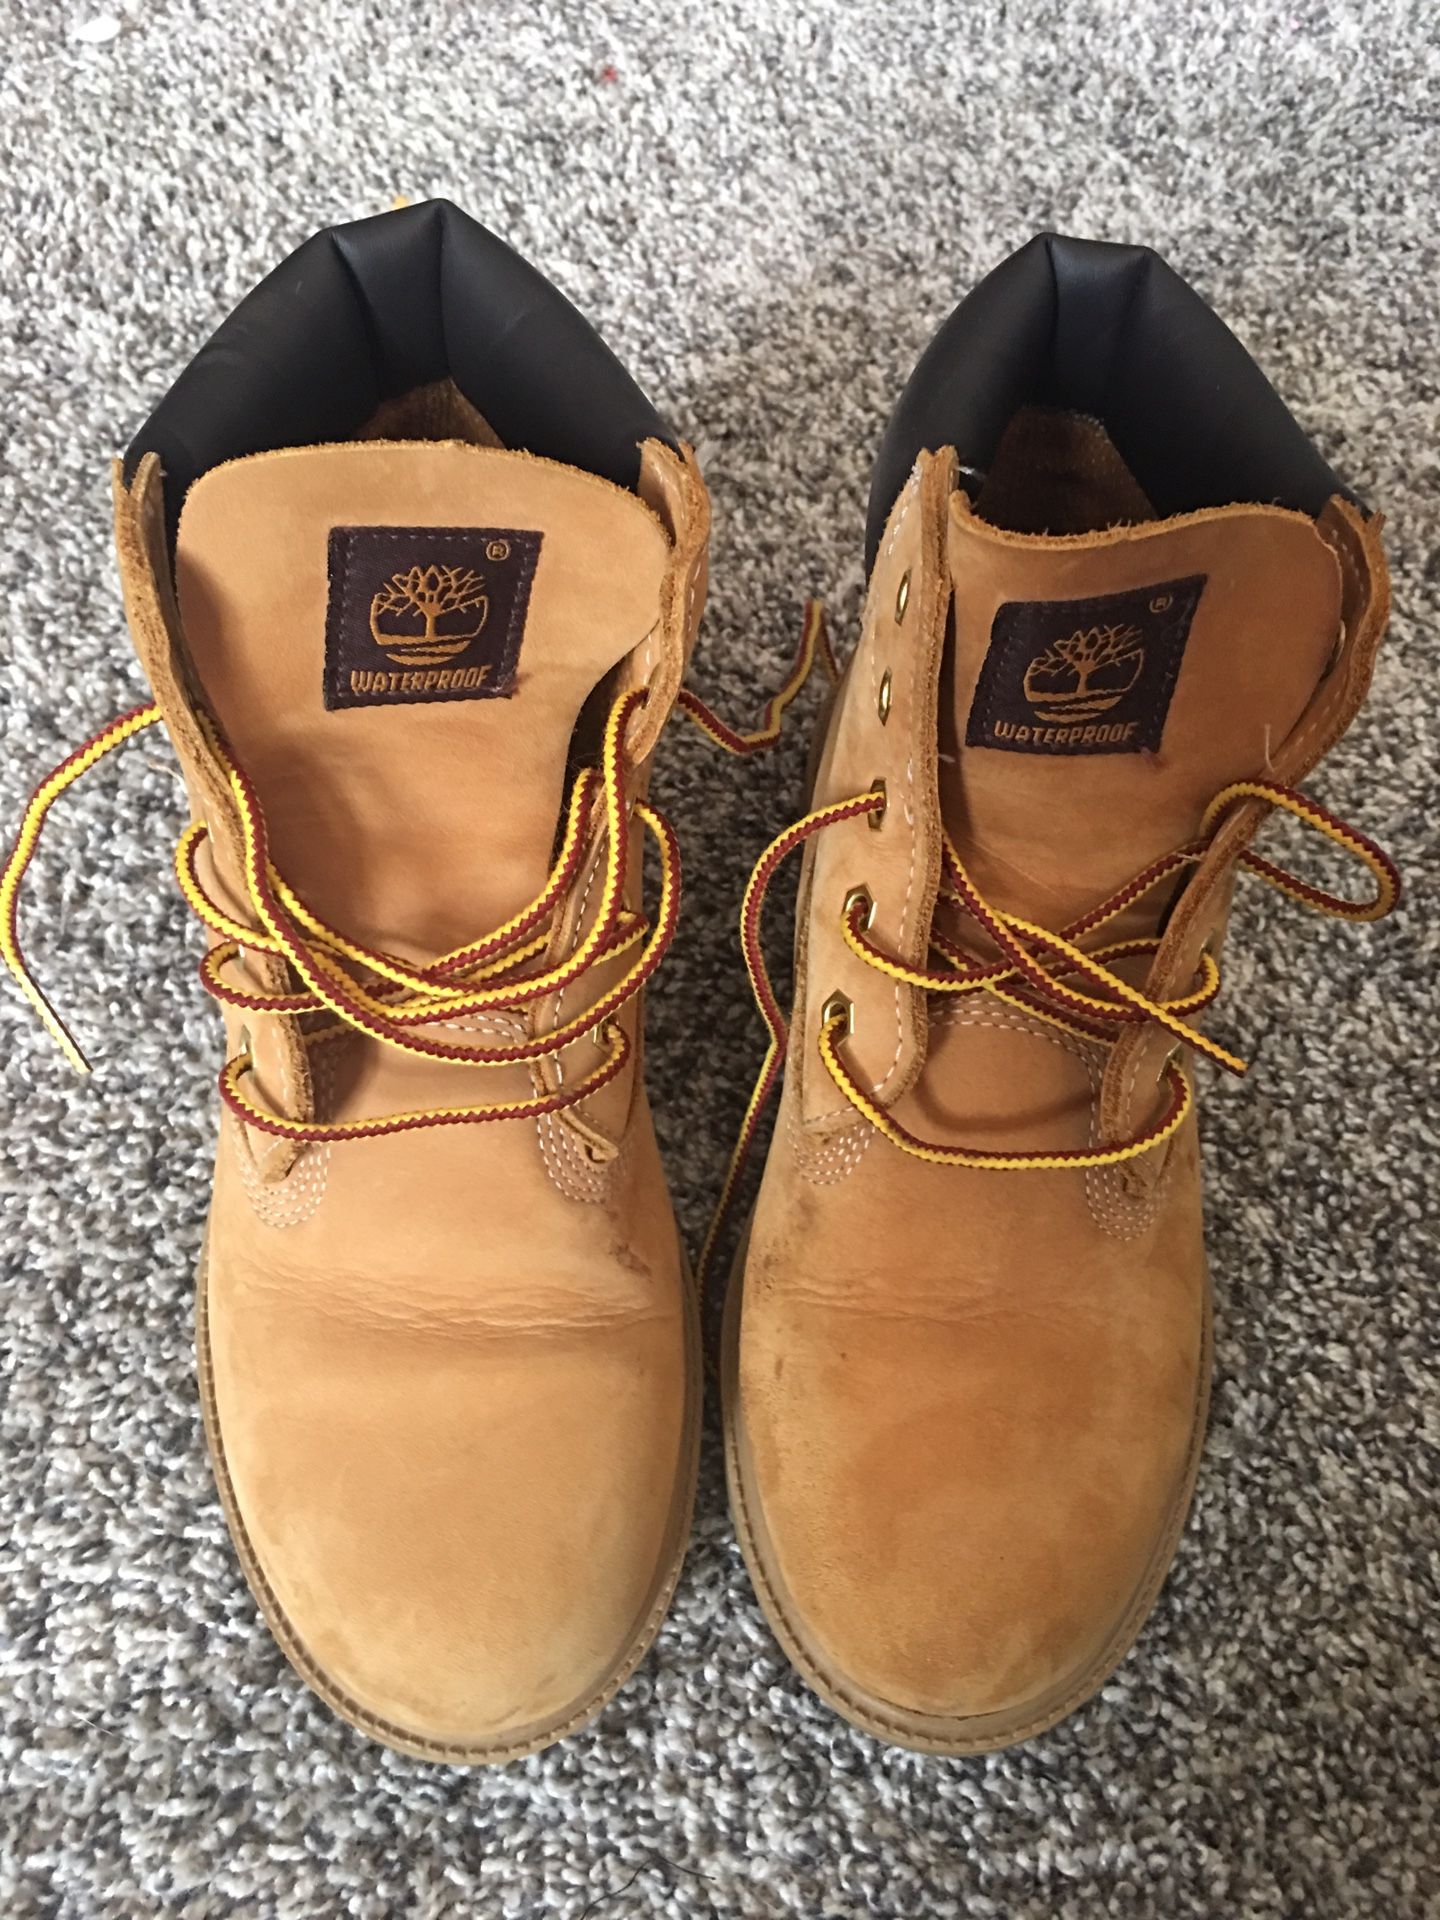 Timberland 6 inch Classic Boots Boys size 3